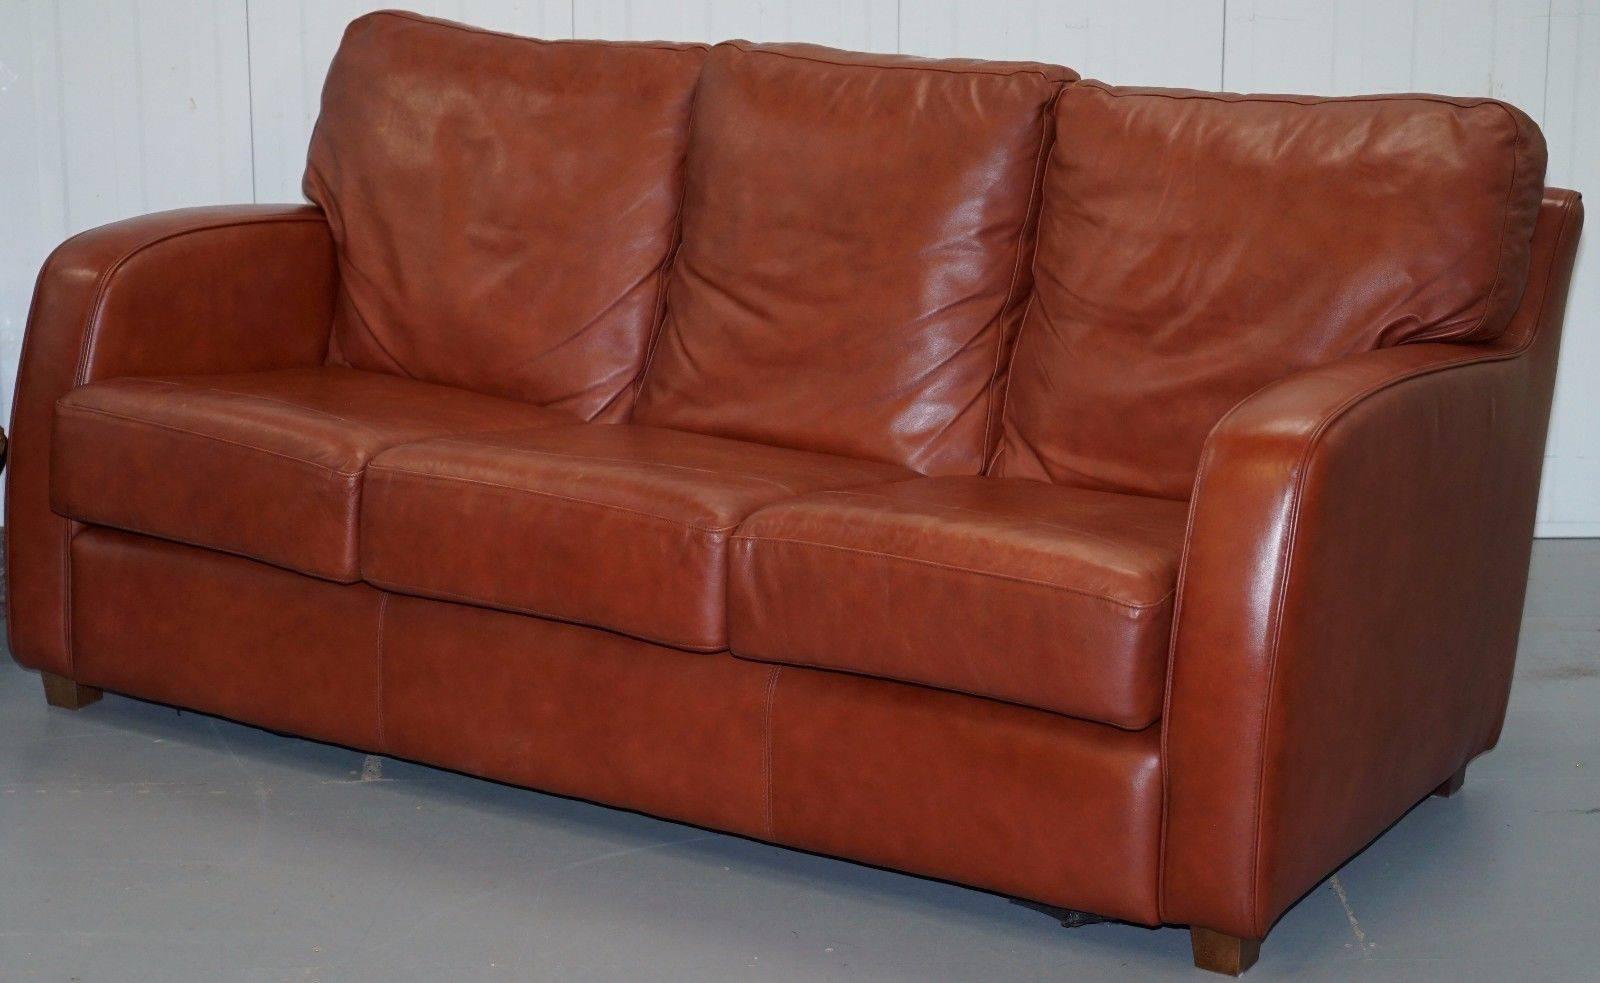 chestnut brown leather sofa